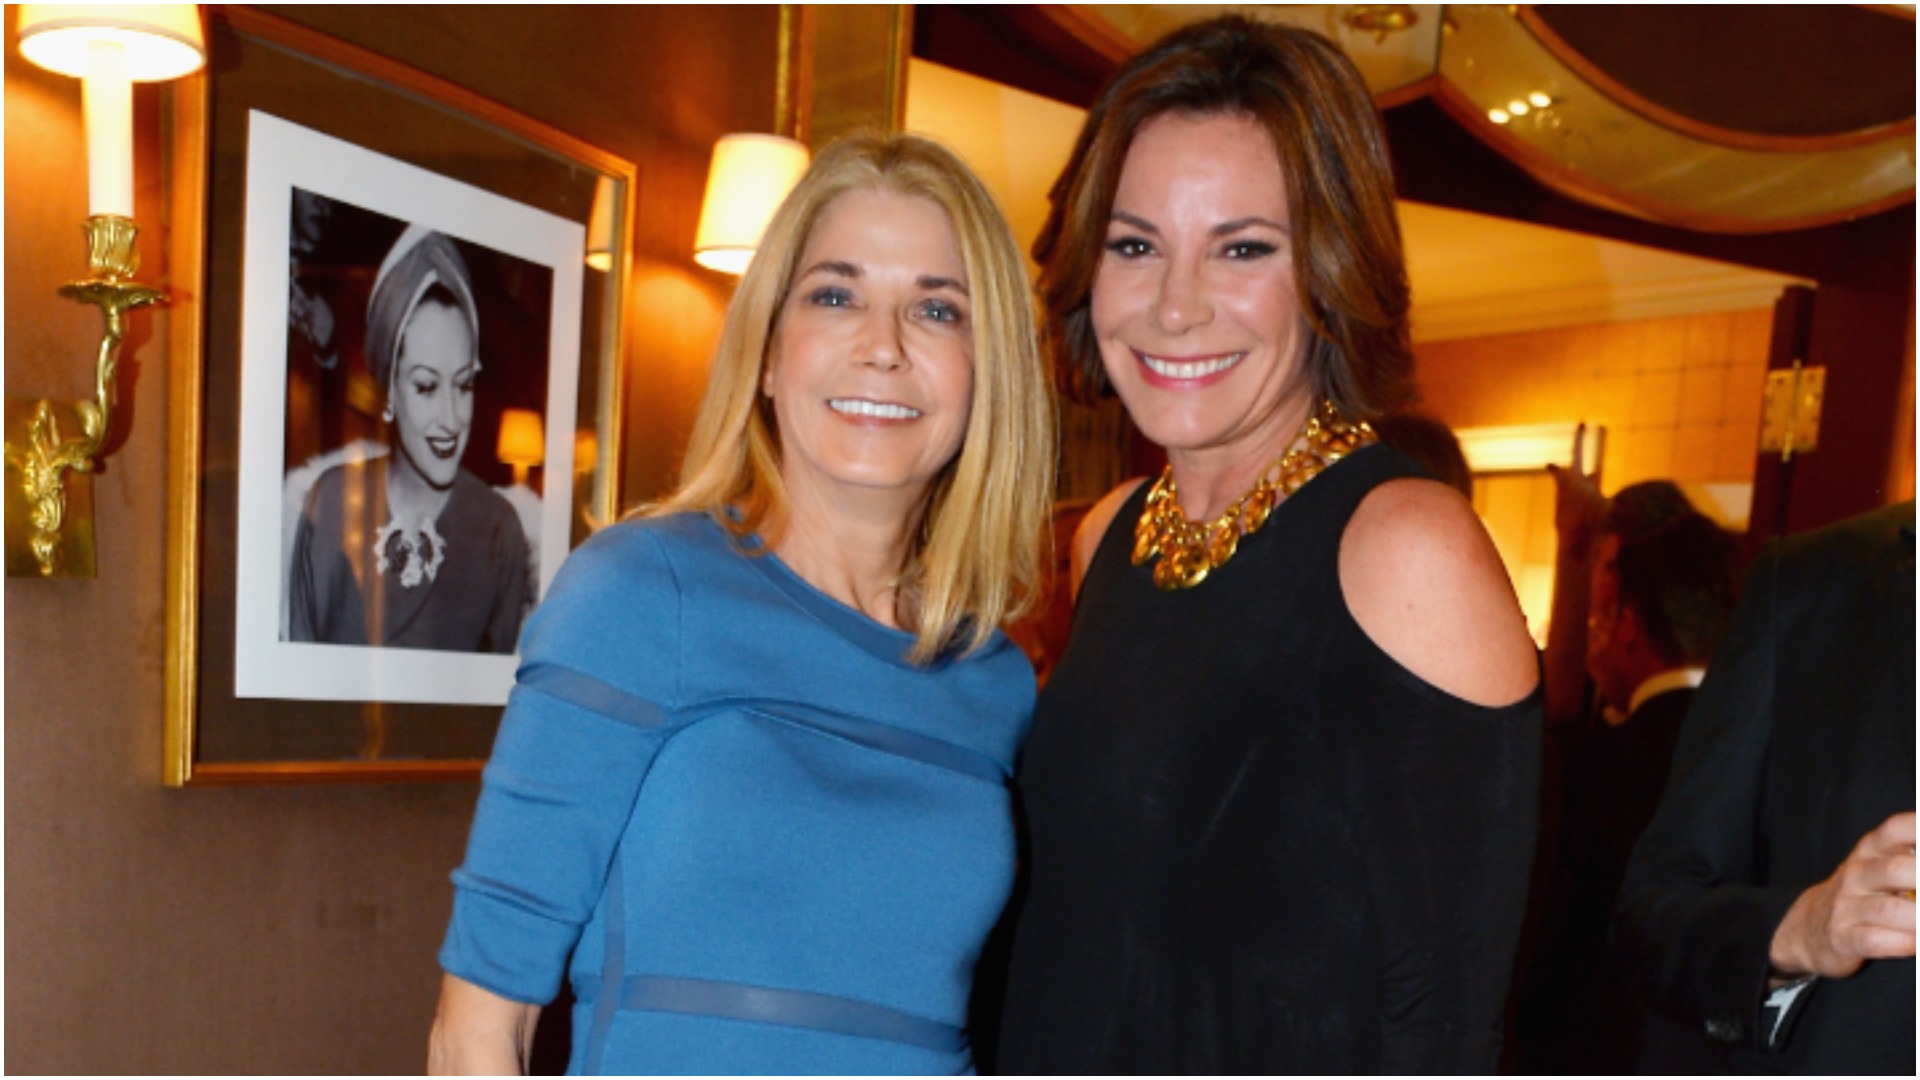 Candace Bushnell and Luann de Lesseps attended Verdura Celebrates the Hearst Castle Preservation Foundation in 2017 and posed for a photo